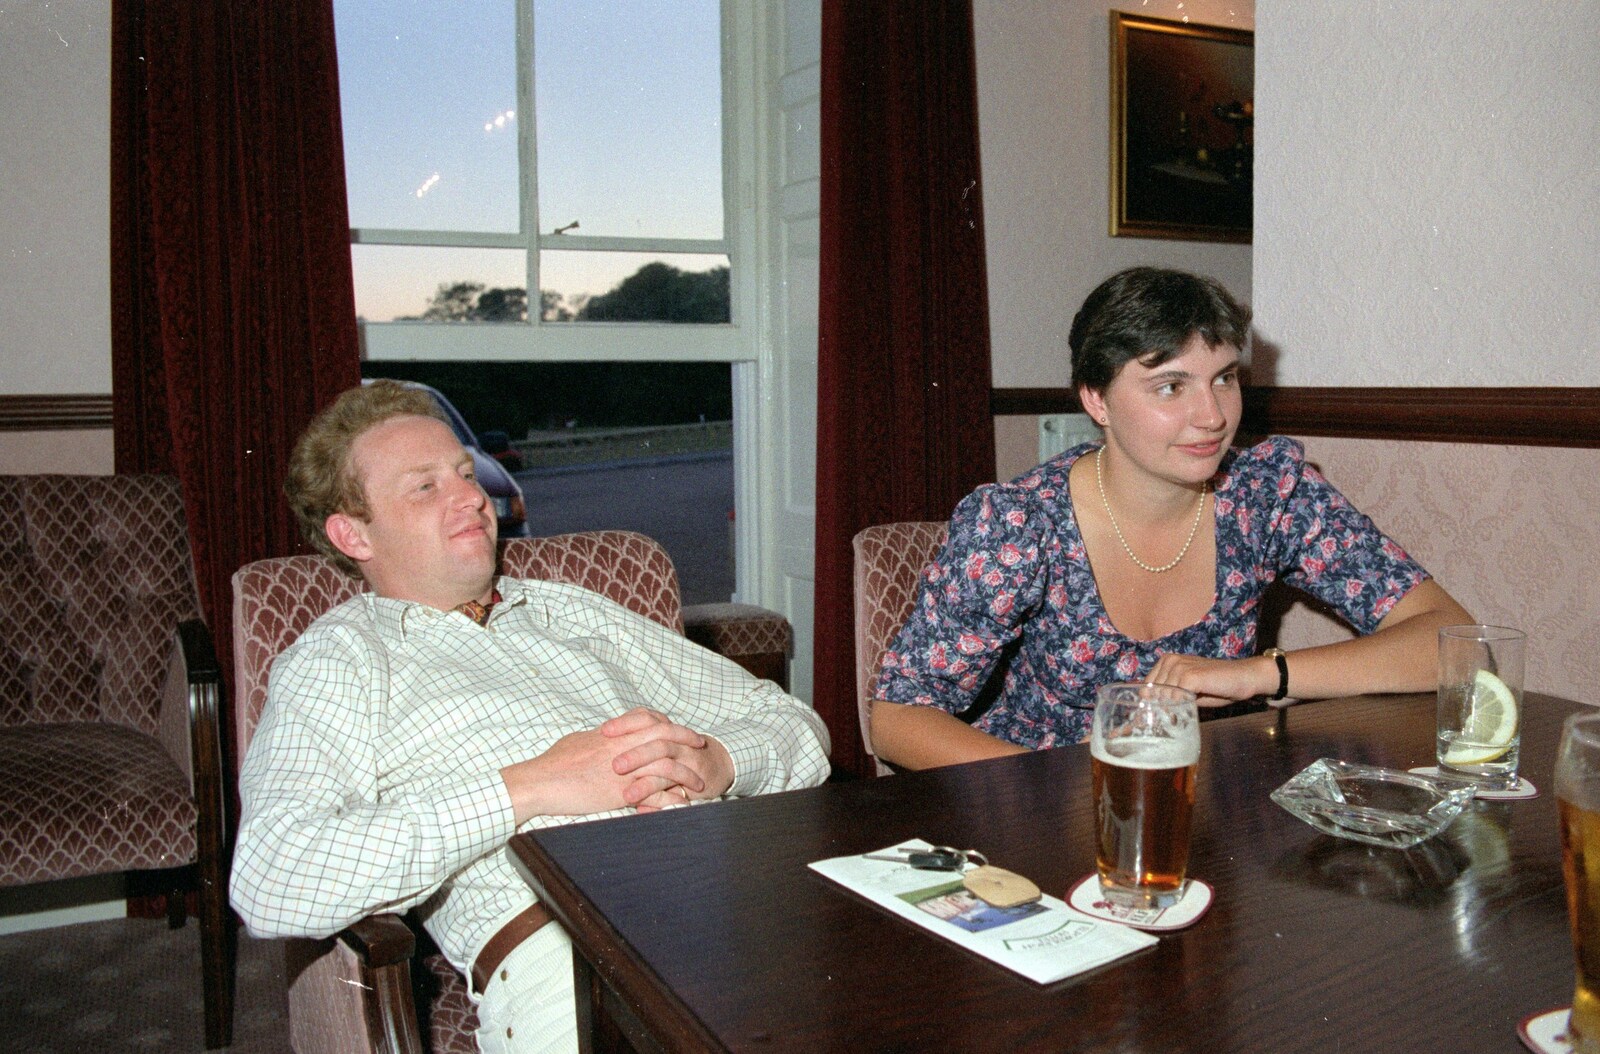 Uni: Country Clubs, On The Beach and Organs, Plymouth - 28th May 1989: Andrew and Rebecca